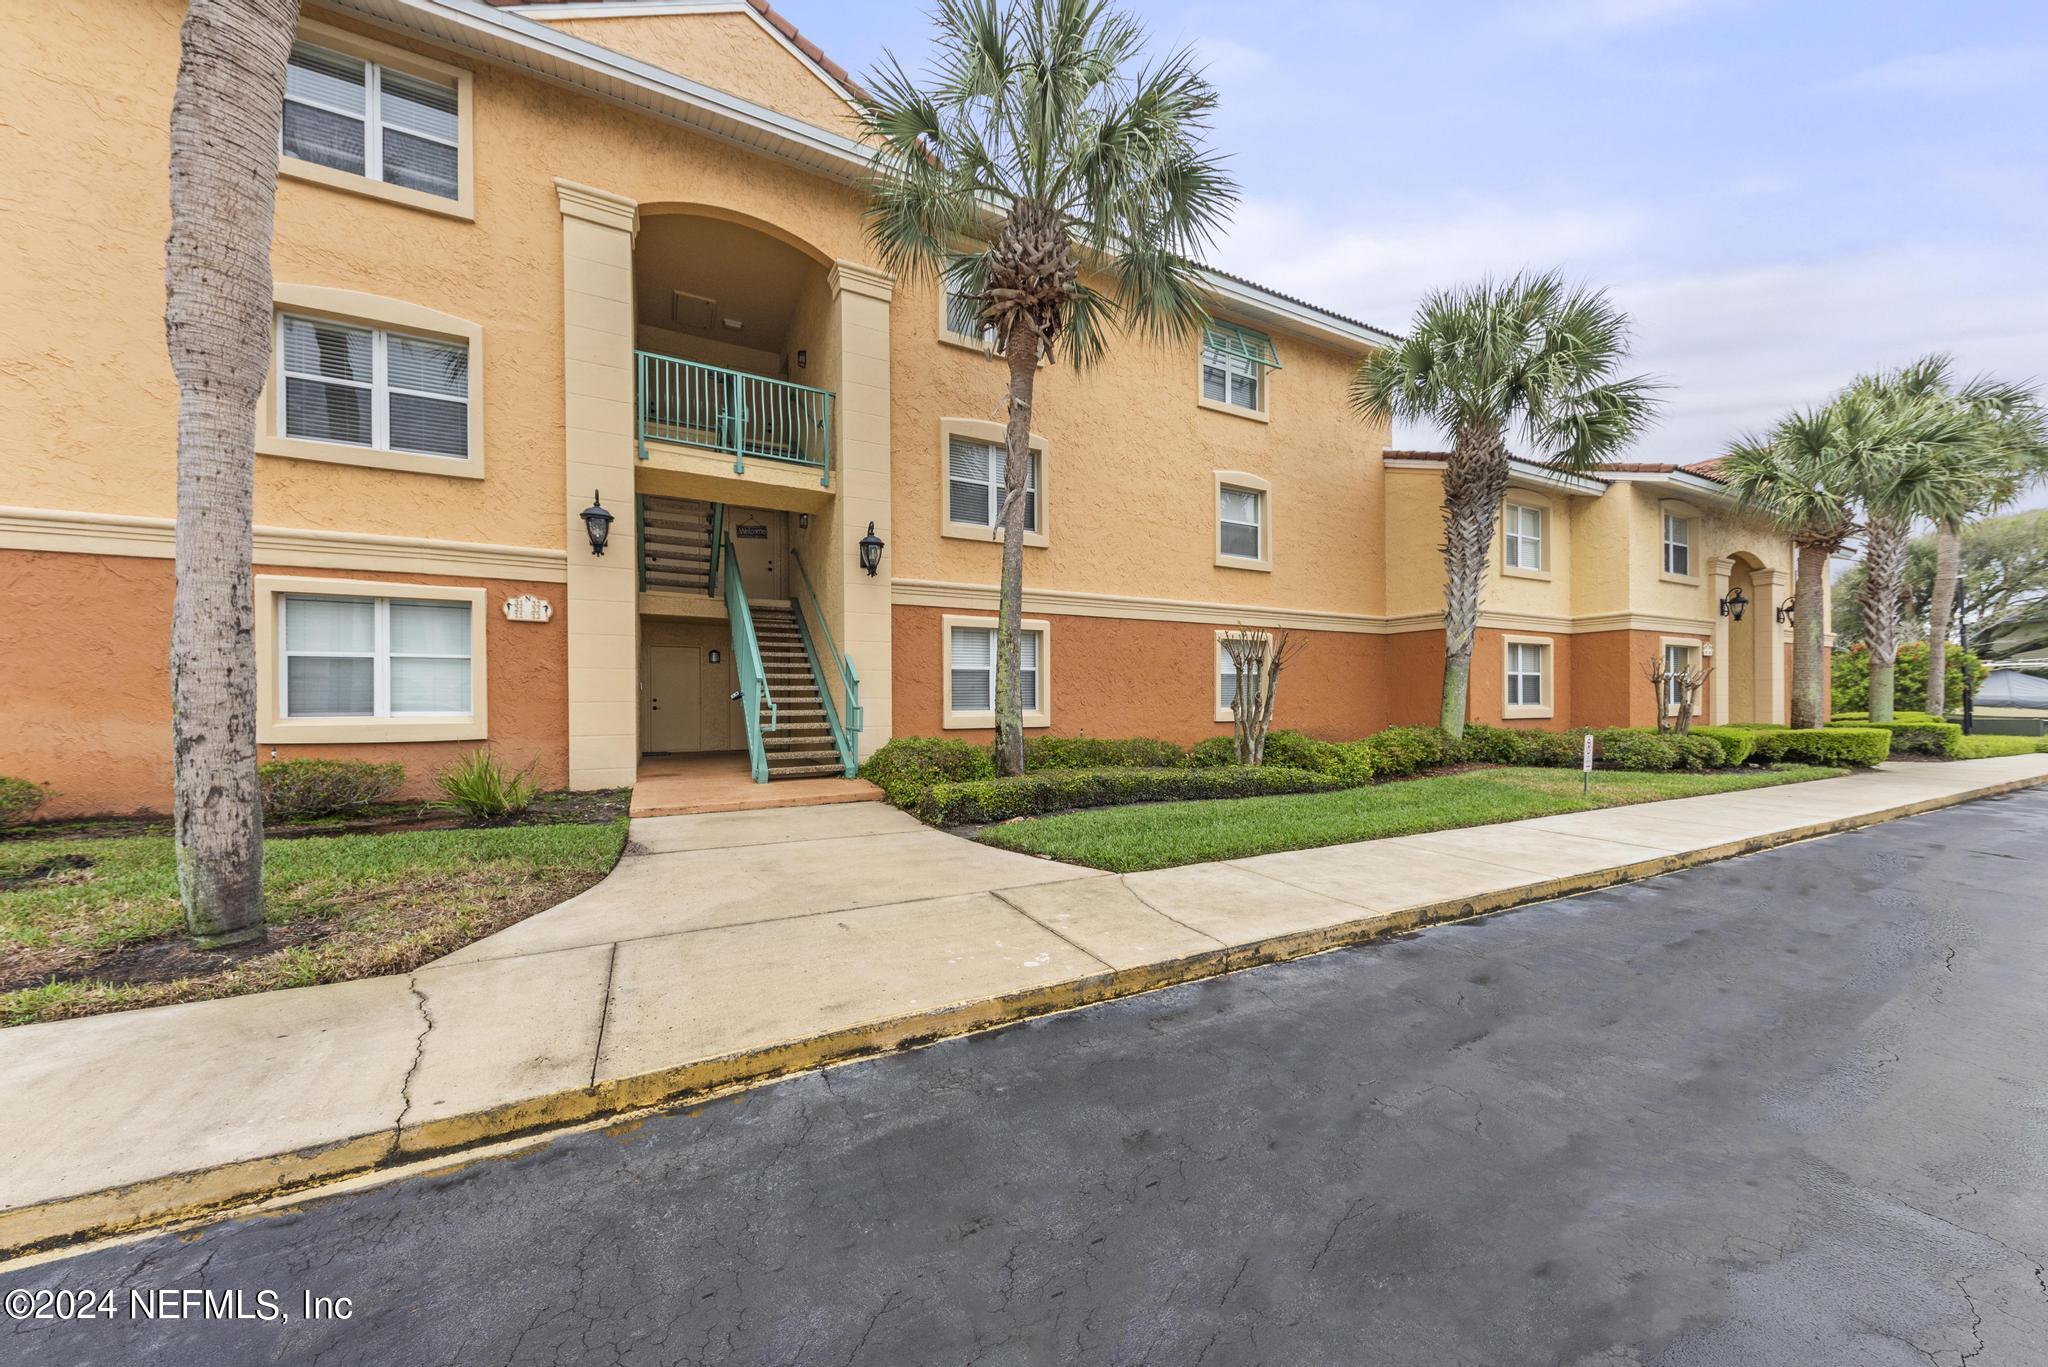 Jacksonville Beach, FL home for sale located at 201 25th Avenue S Unit N12, Jacksonville Beach, FL 32250